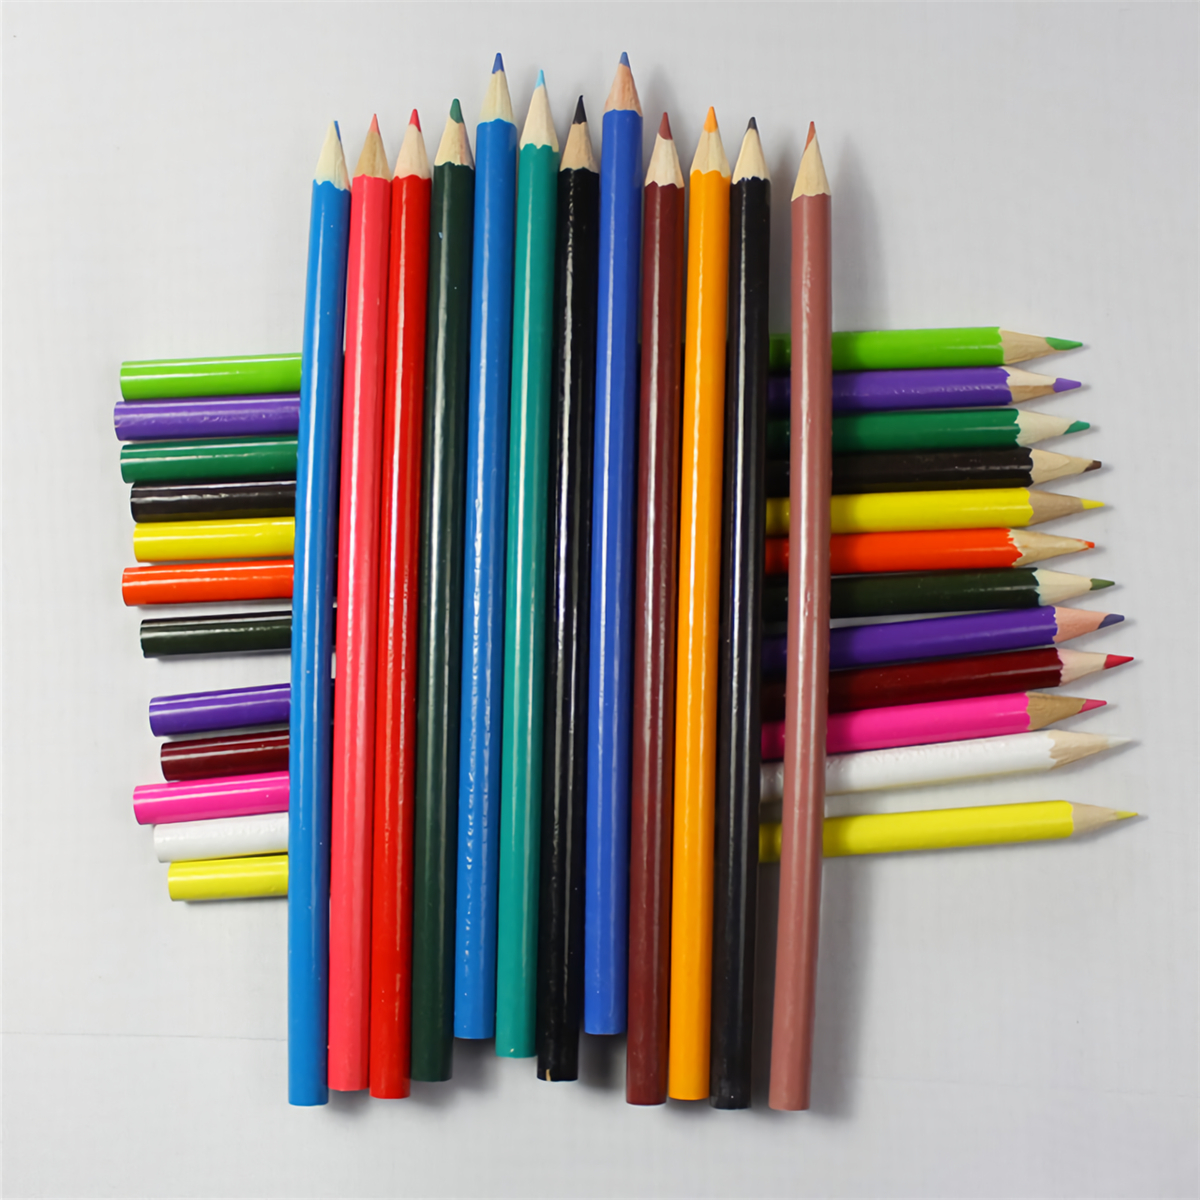 24-color-Colored-Pencils-Wood-Artist-Painting-Oil-Color-Pencil-for-School-Drawing-Sketch-Art-Supplie-1673822-3